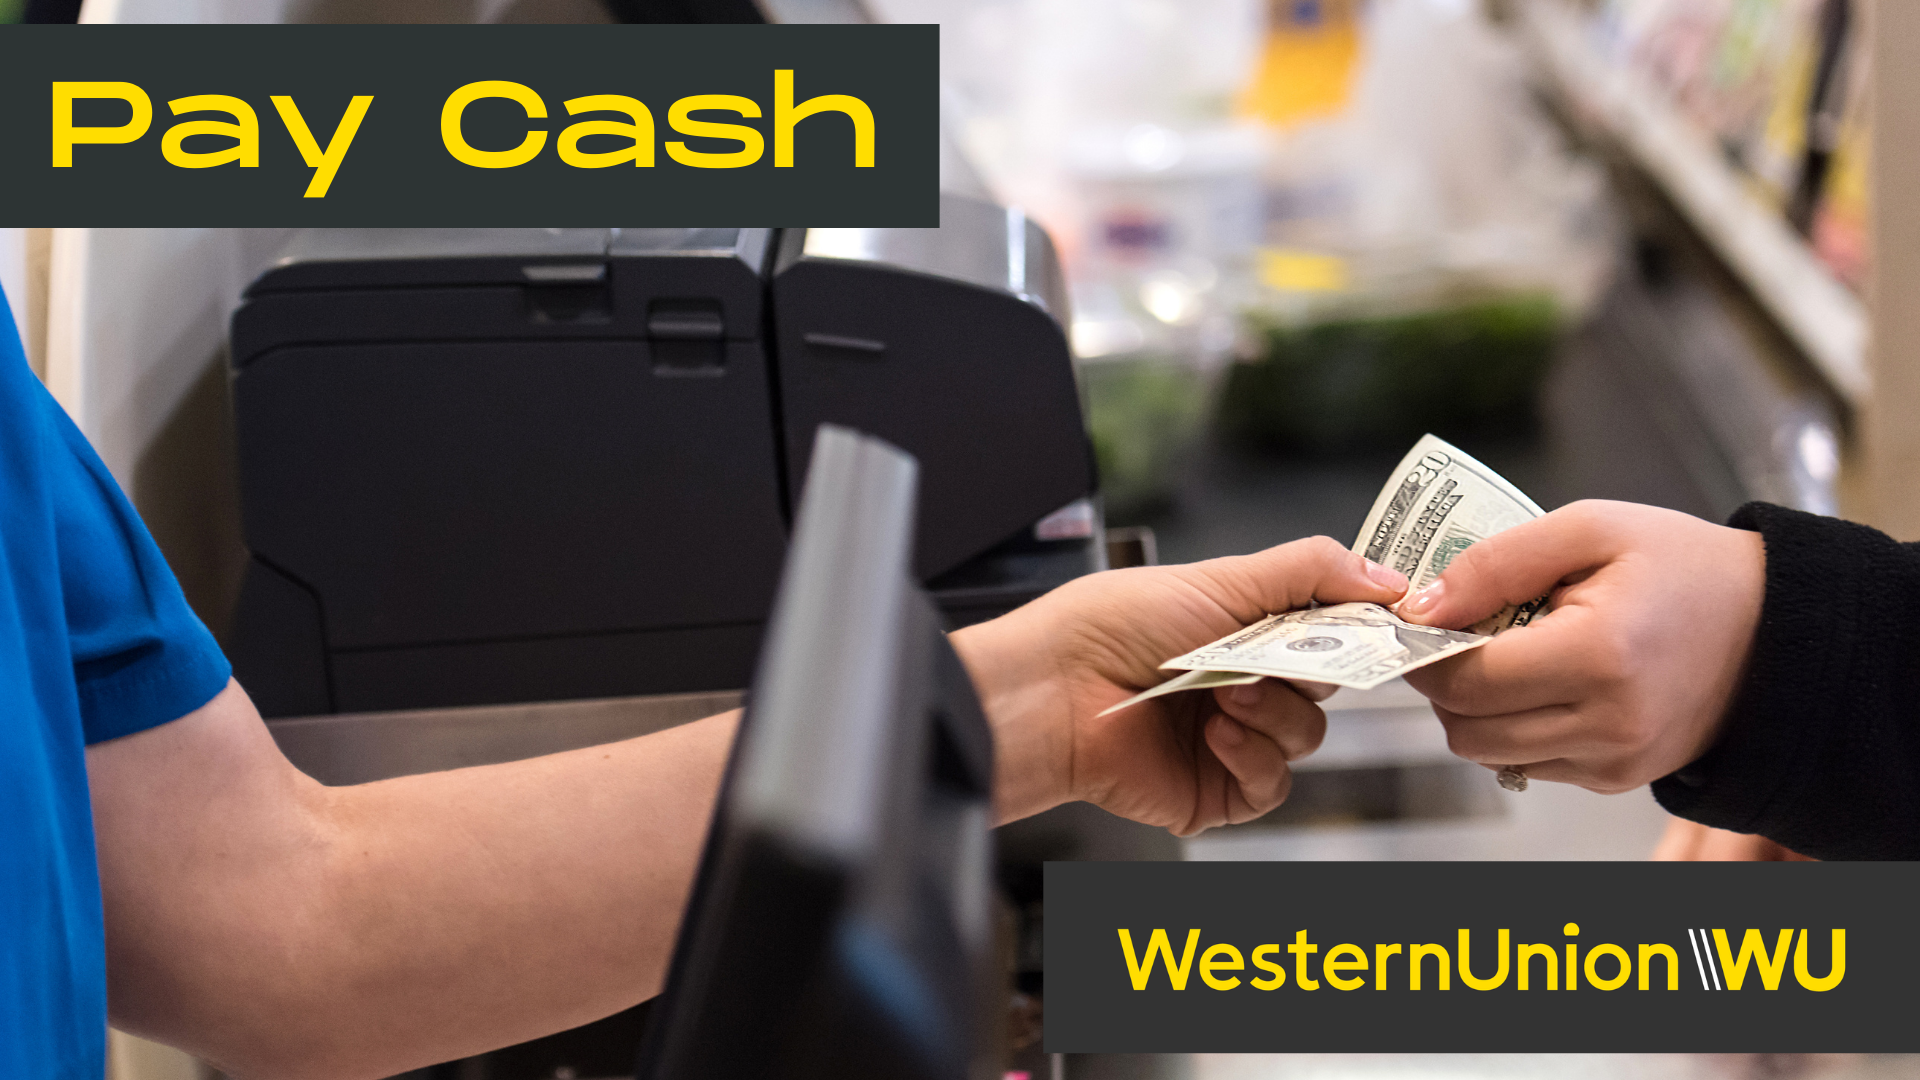 Click here to get more information on western union option